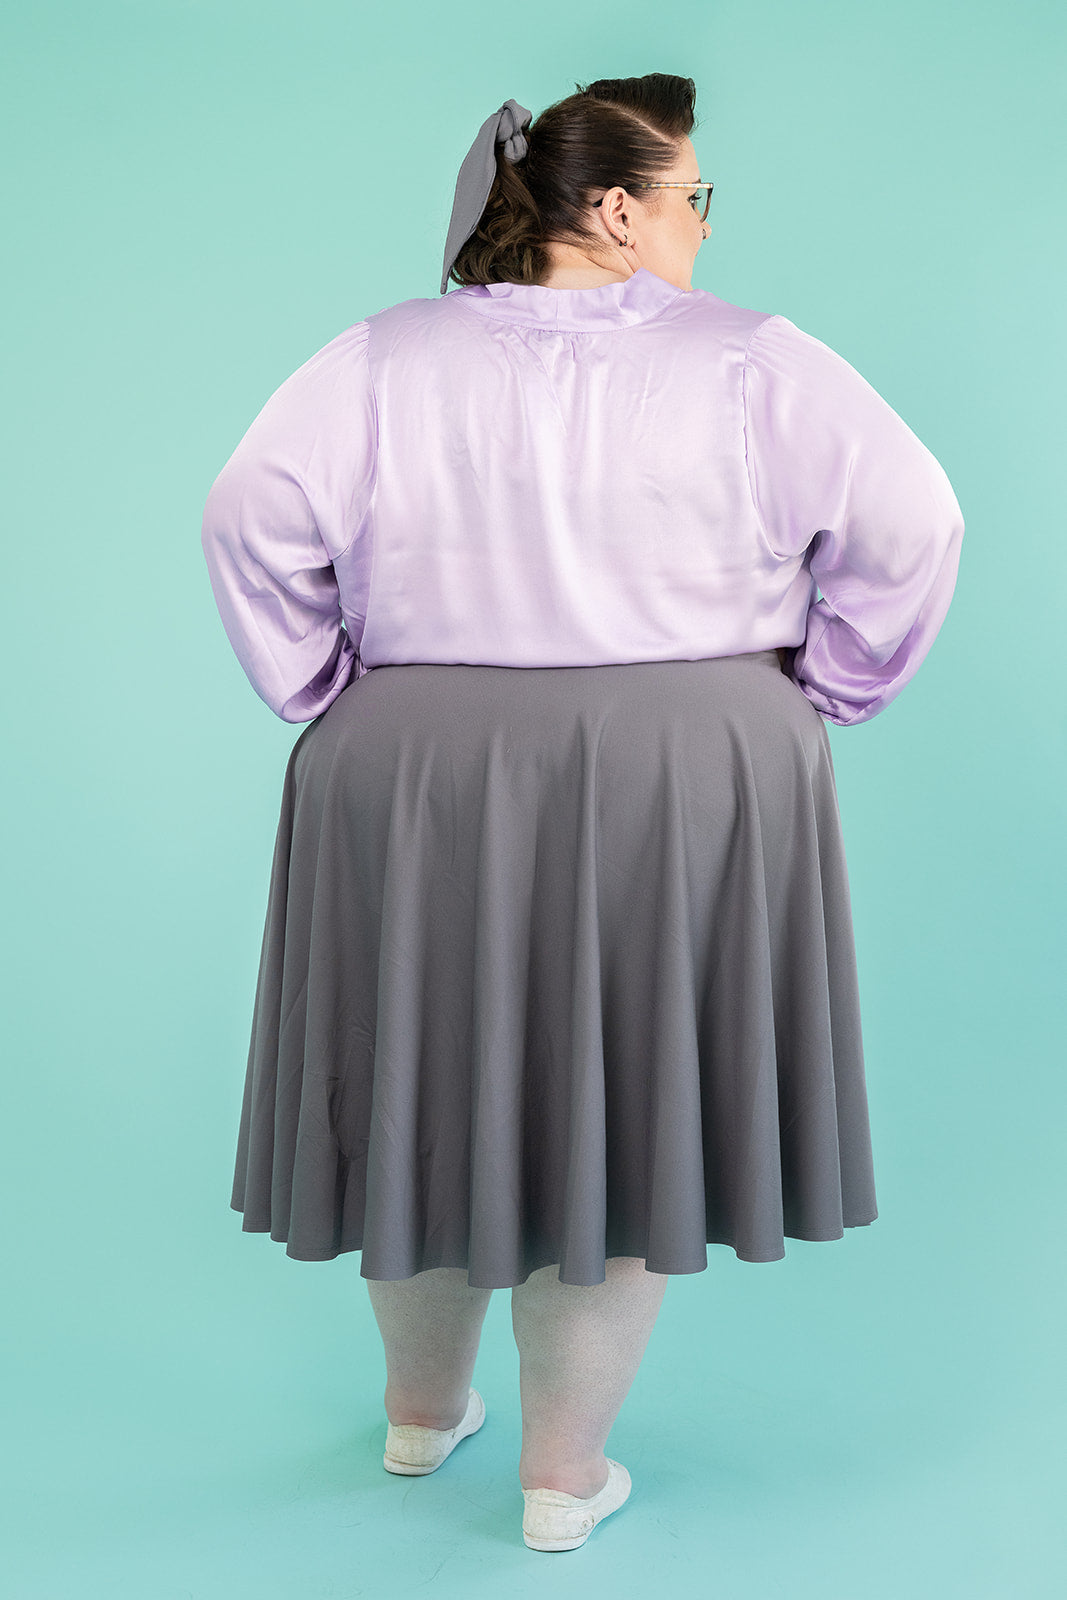 Photo of plus-size brunette woman in lilac coloured blouse and grey skirt. She is facing away from the camera with her hands on her hips.